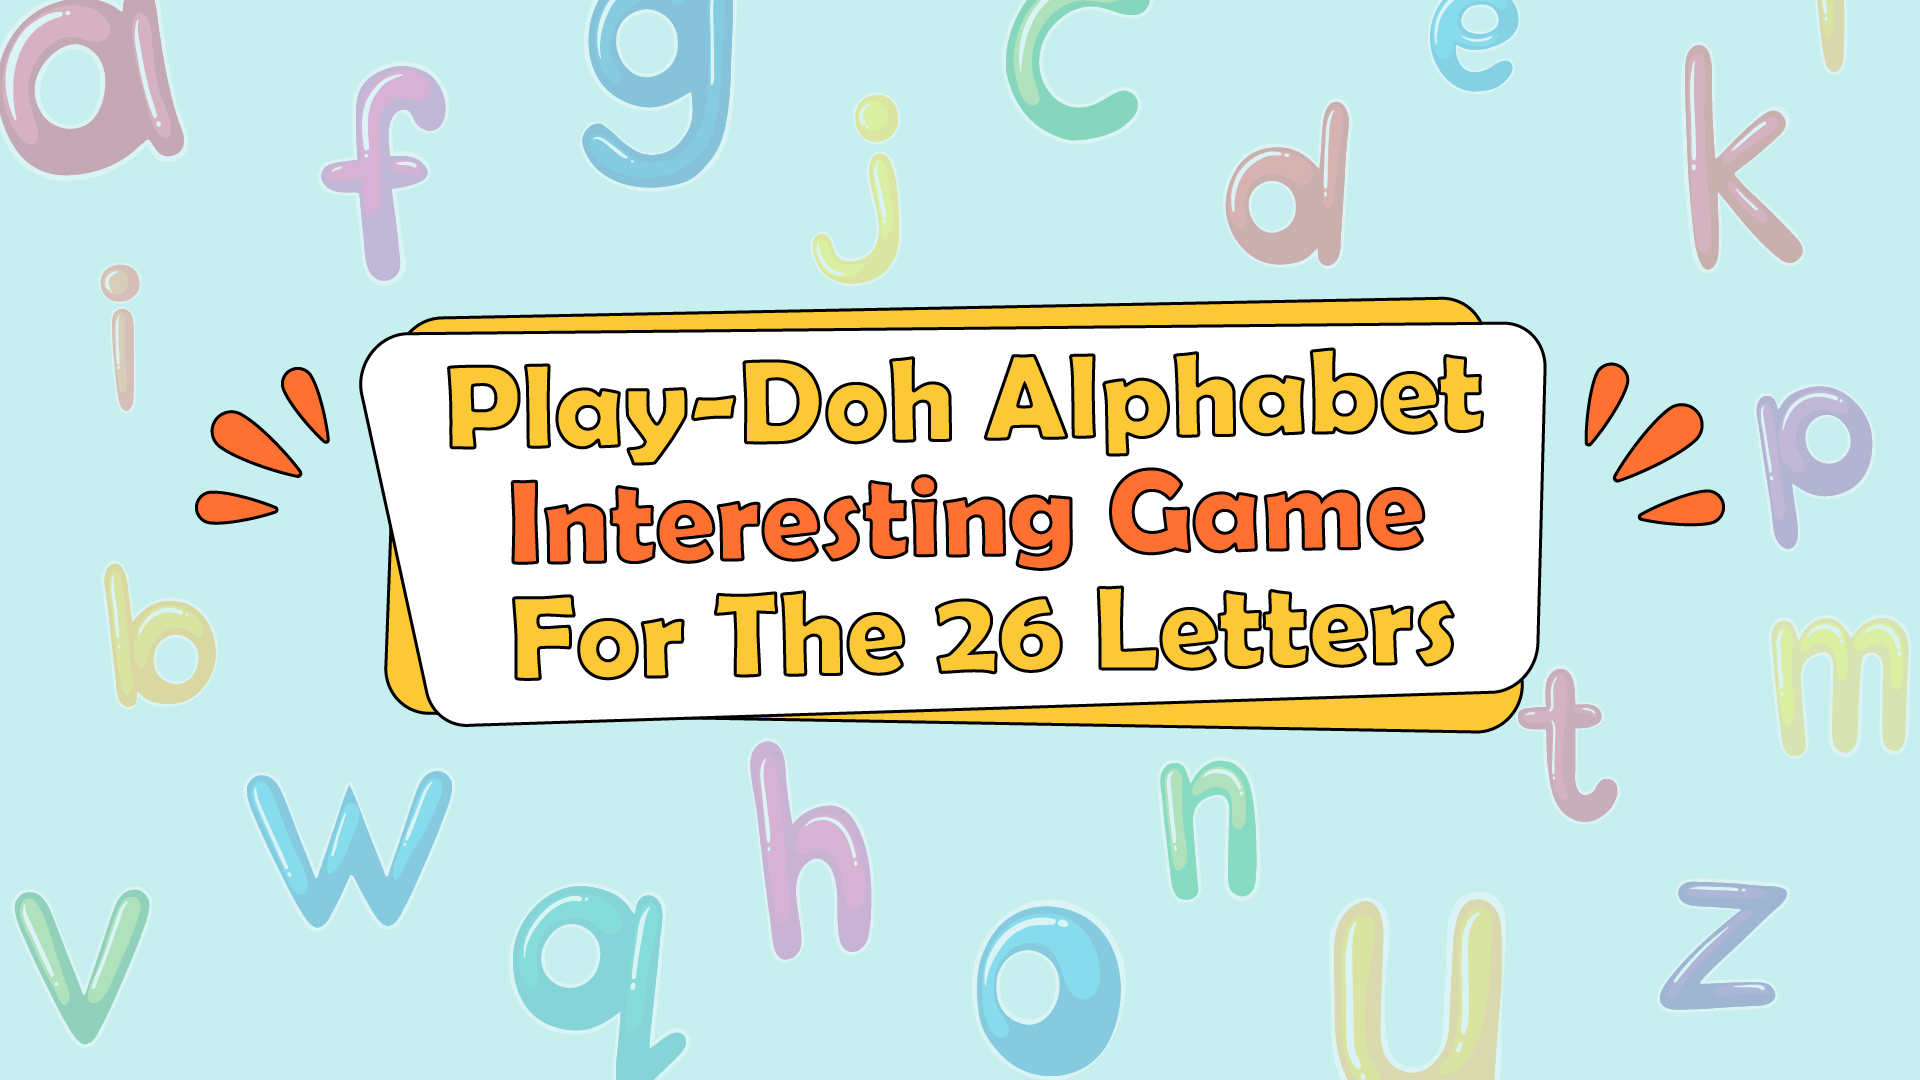 Play-Doh Alphabet Interesting Game for the 26 letters